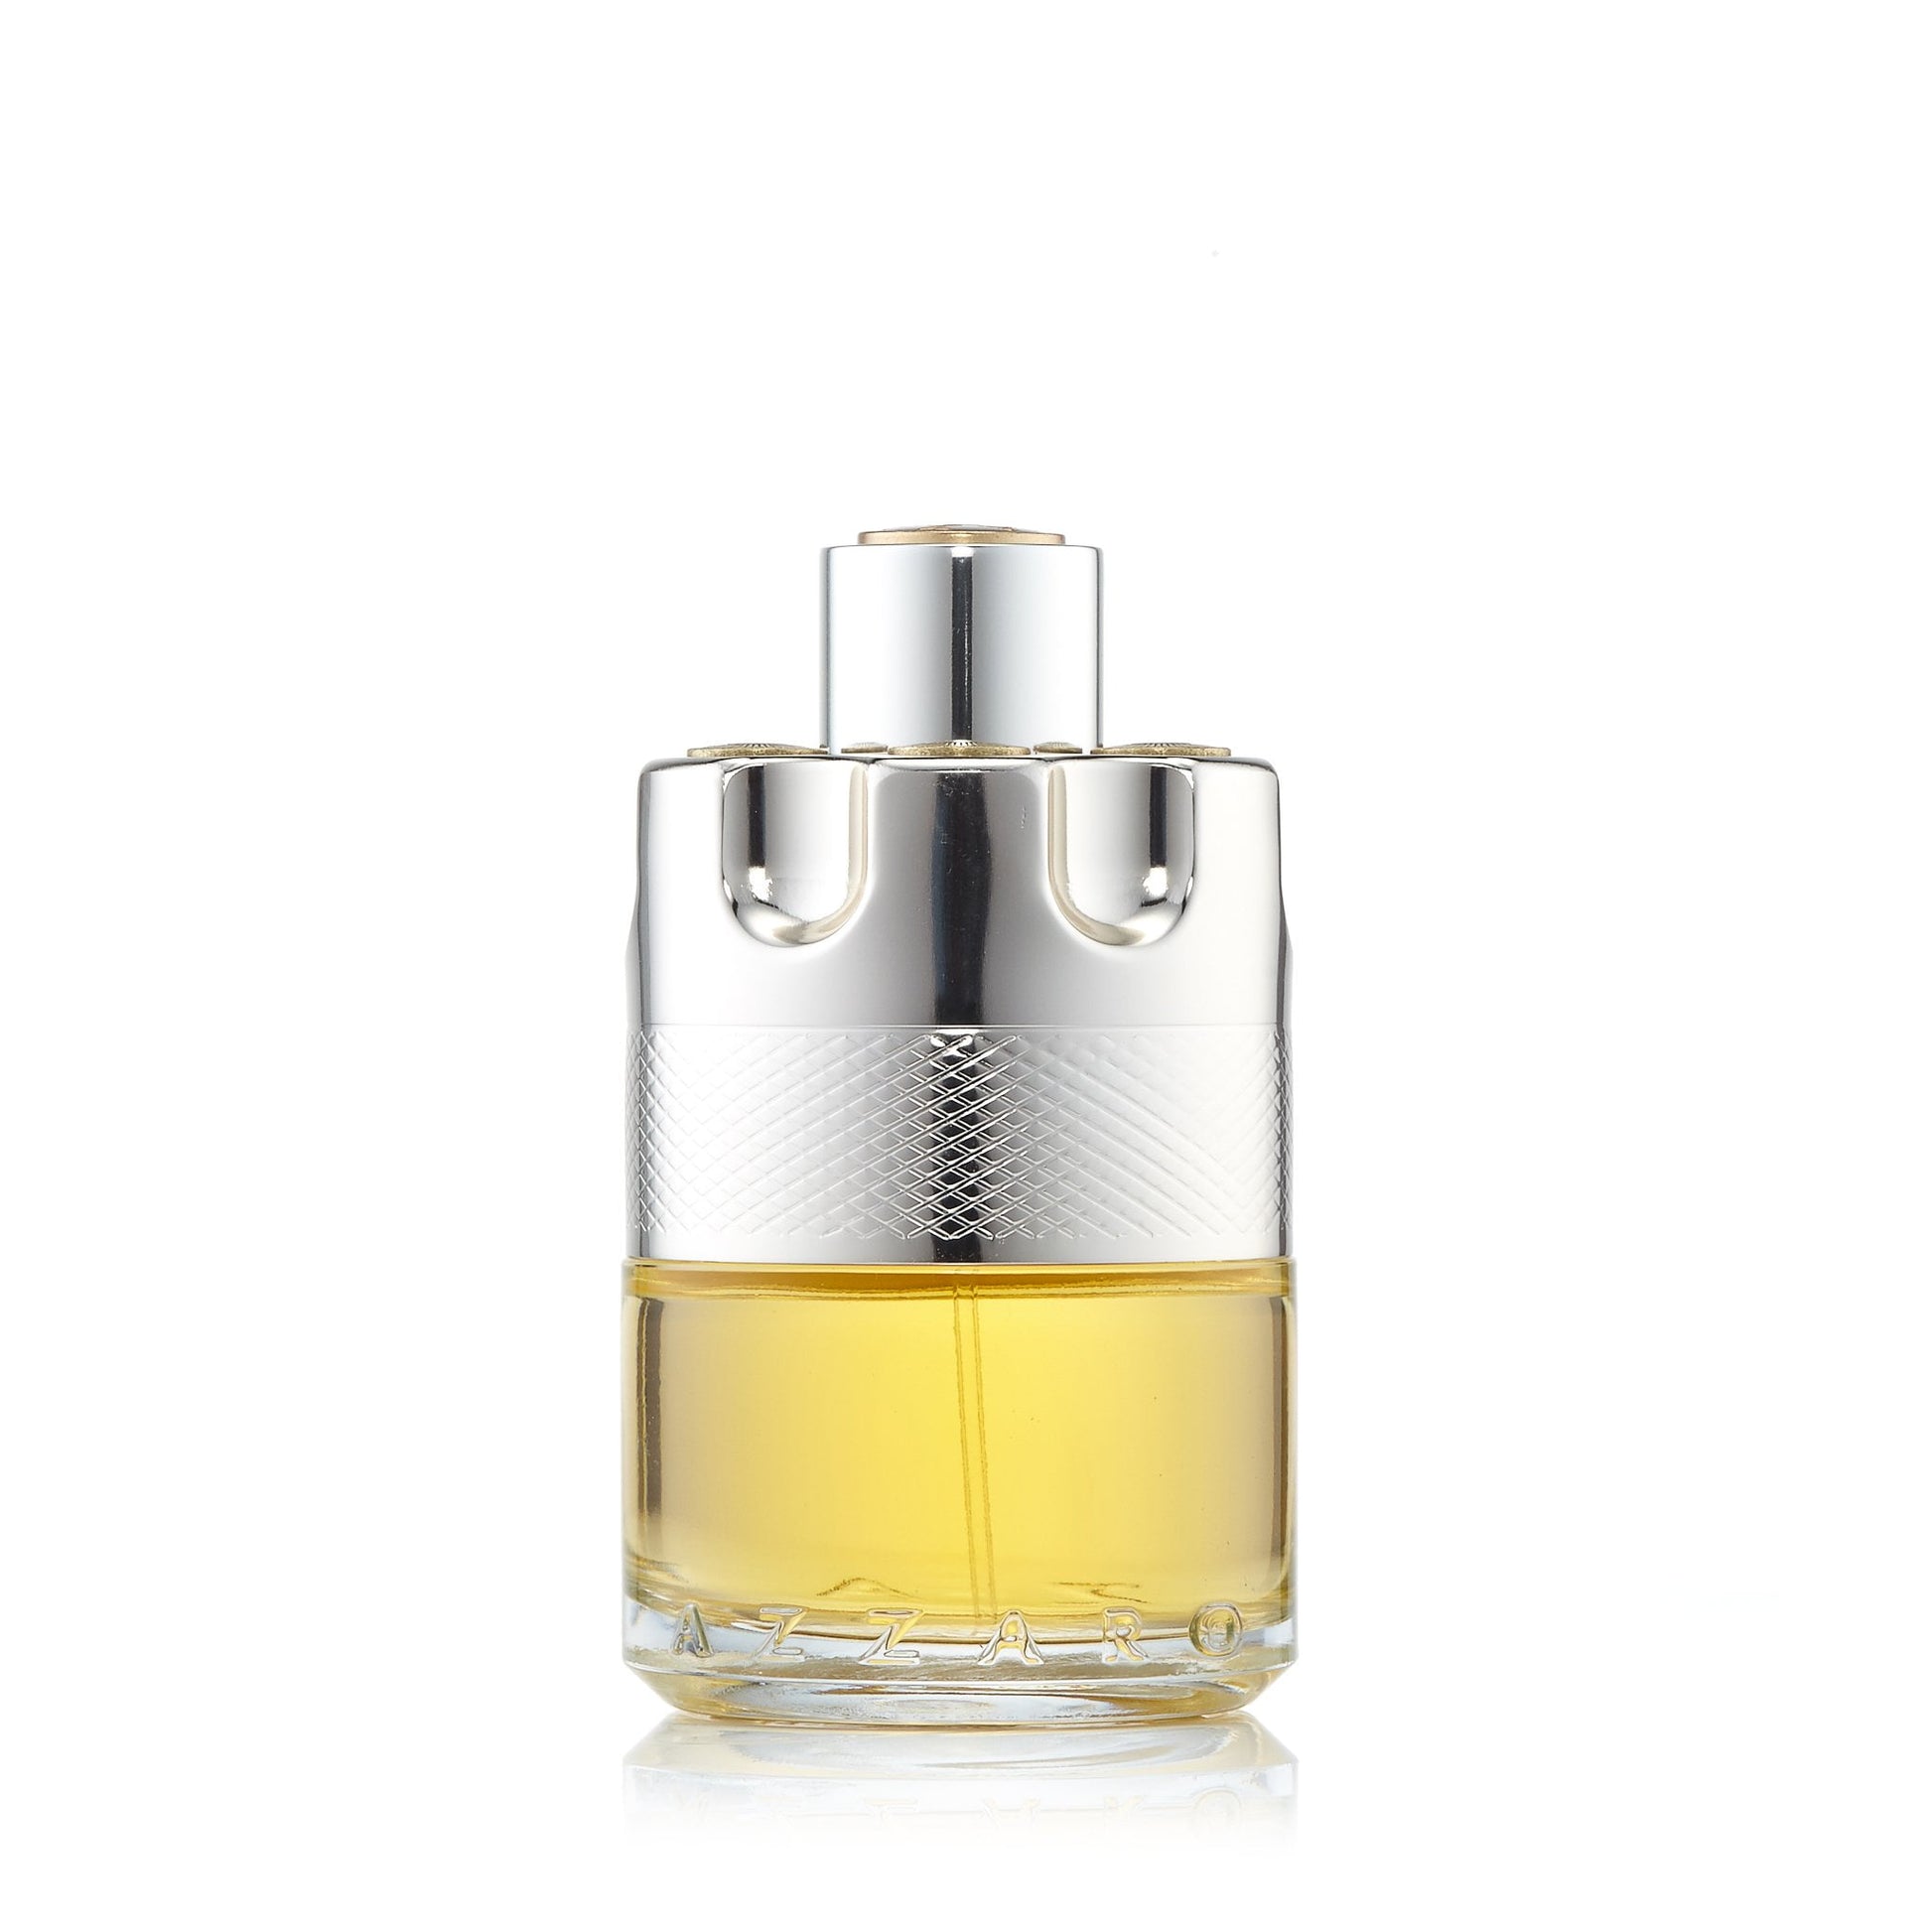 Wanted Eau de Toilette Spray for Men by Azzaro, Product image 4